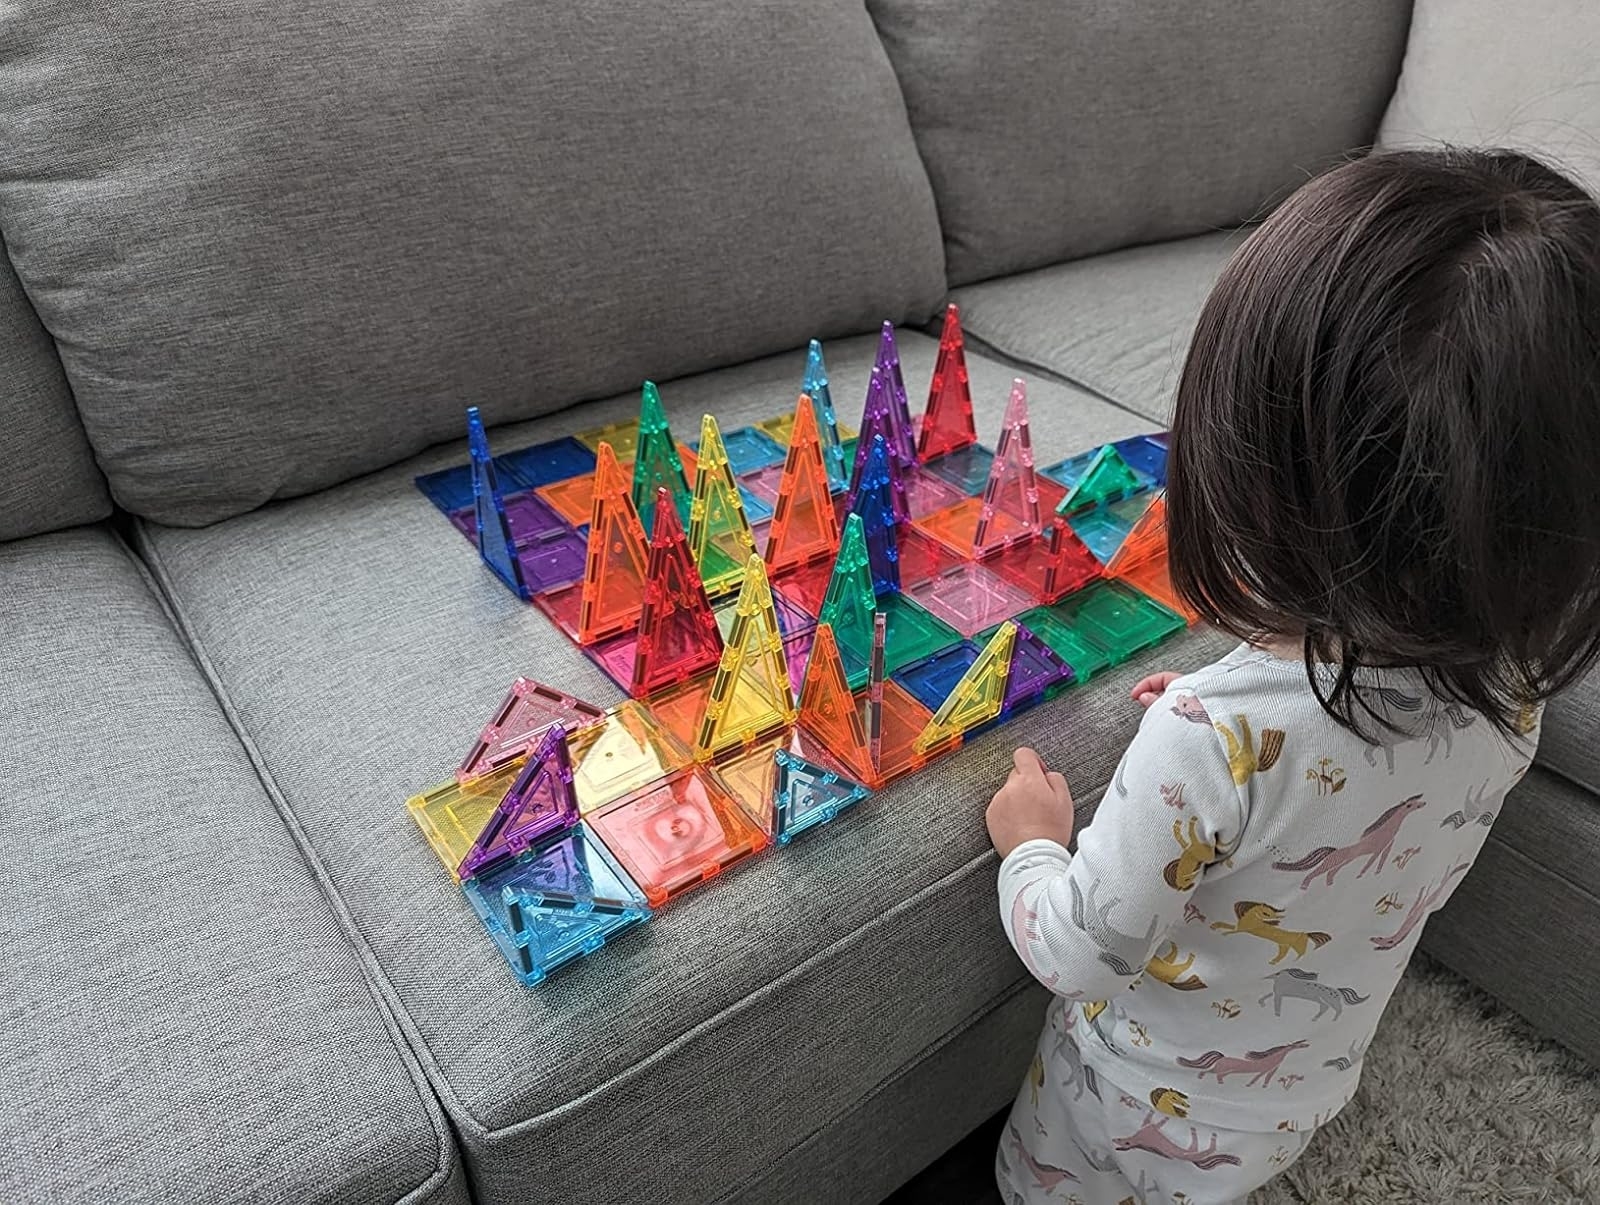 Child playing with colorful magnetic building blocks forming structures on a sofa